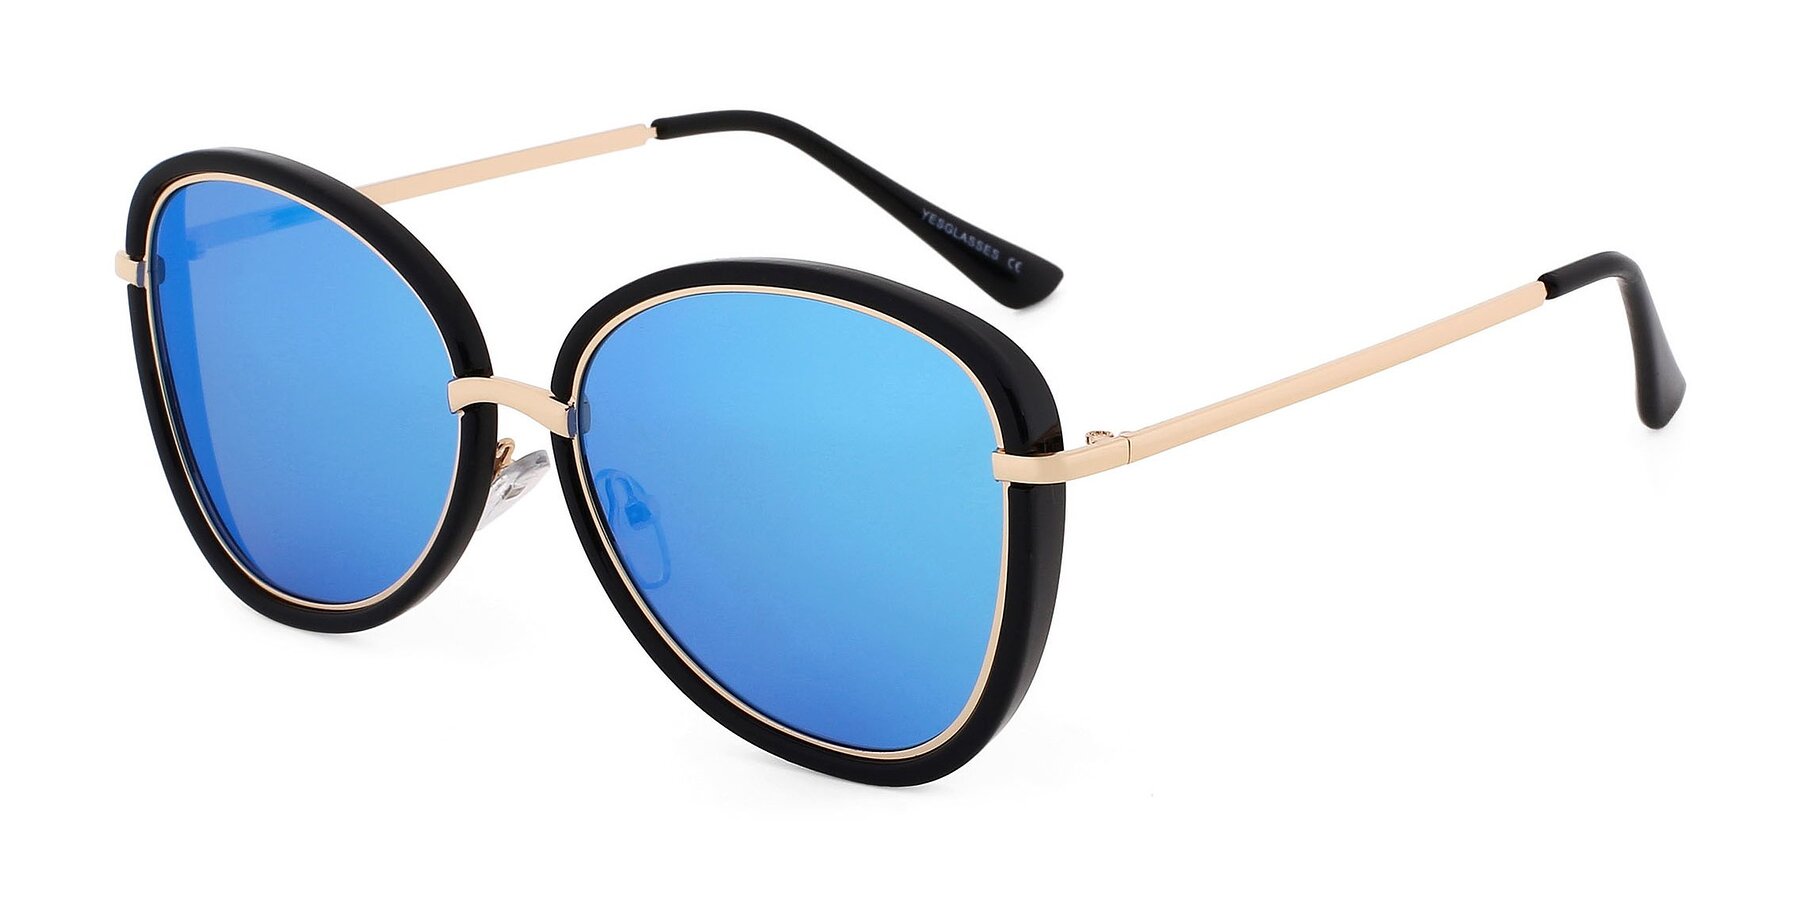 Black-Gold Oversized Metal Bridge Butterfly Mirrored Polarized Sunglasses with Blue Non-Rx Tac Sun Lenses